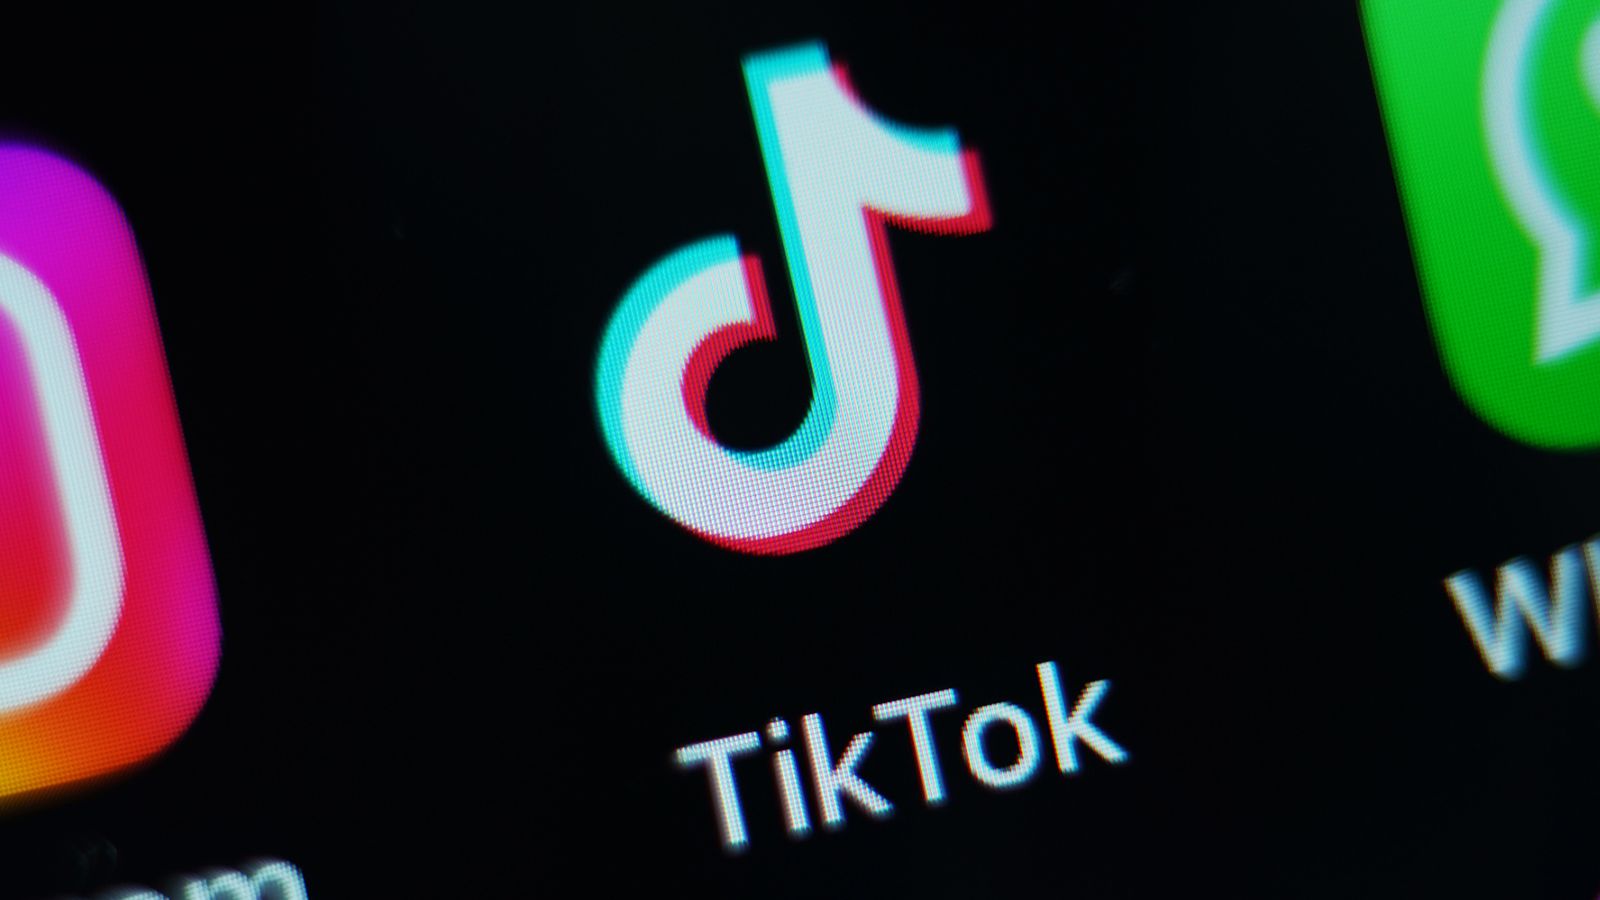 TikTok CEO says ban would 'take billions of dollars out of the pockets of creators'